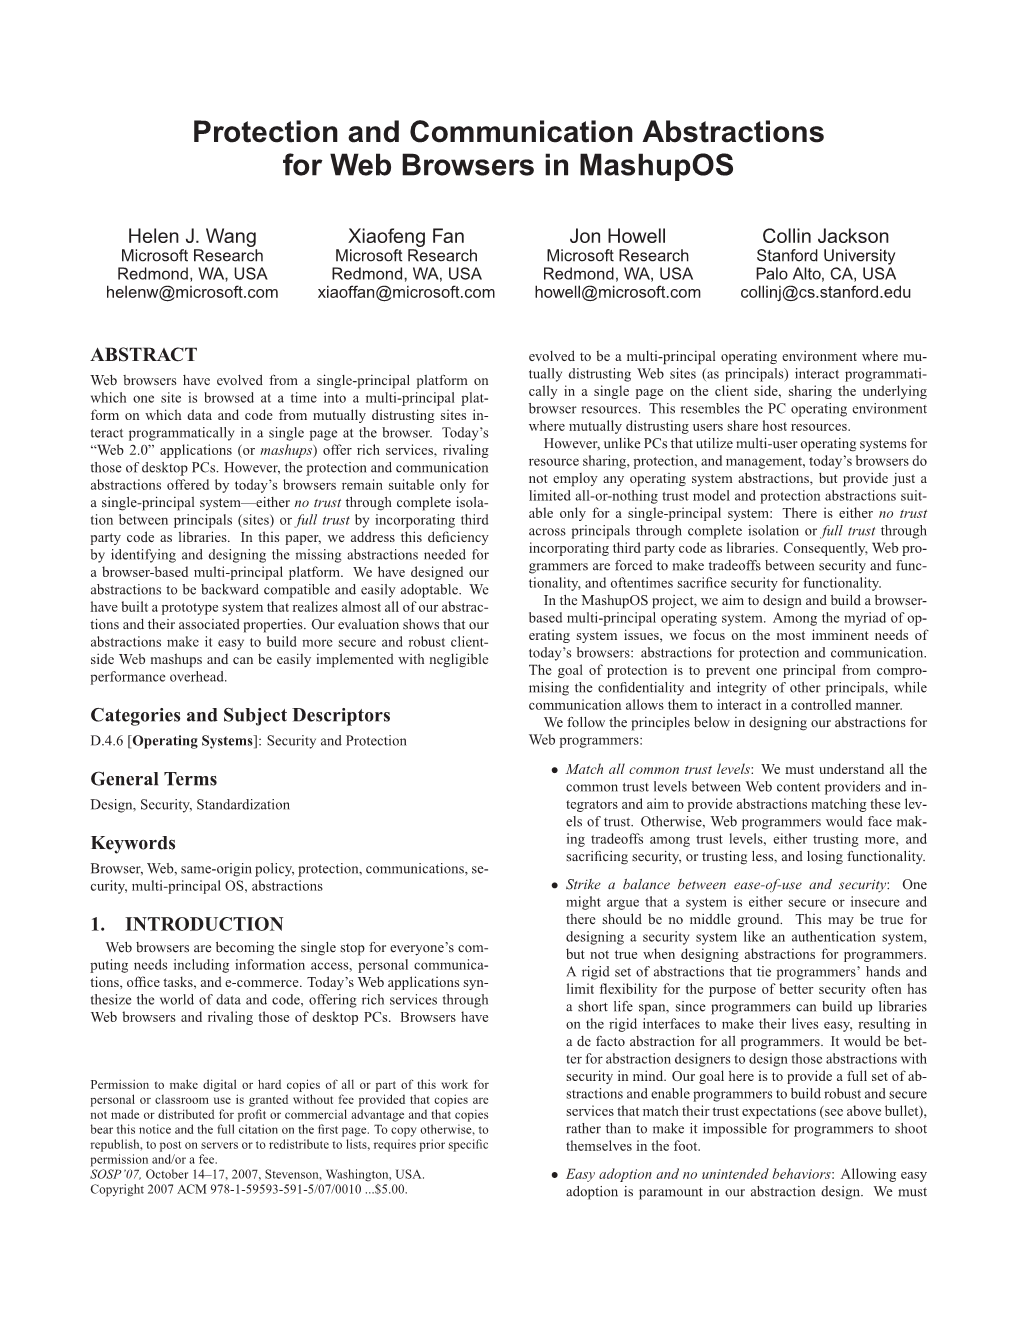 Protection and Communication Abstractions for Web Browsers in Mashupos